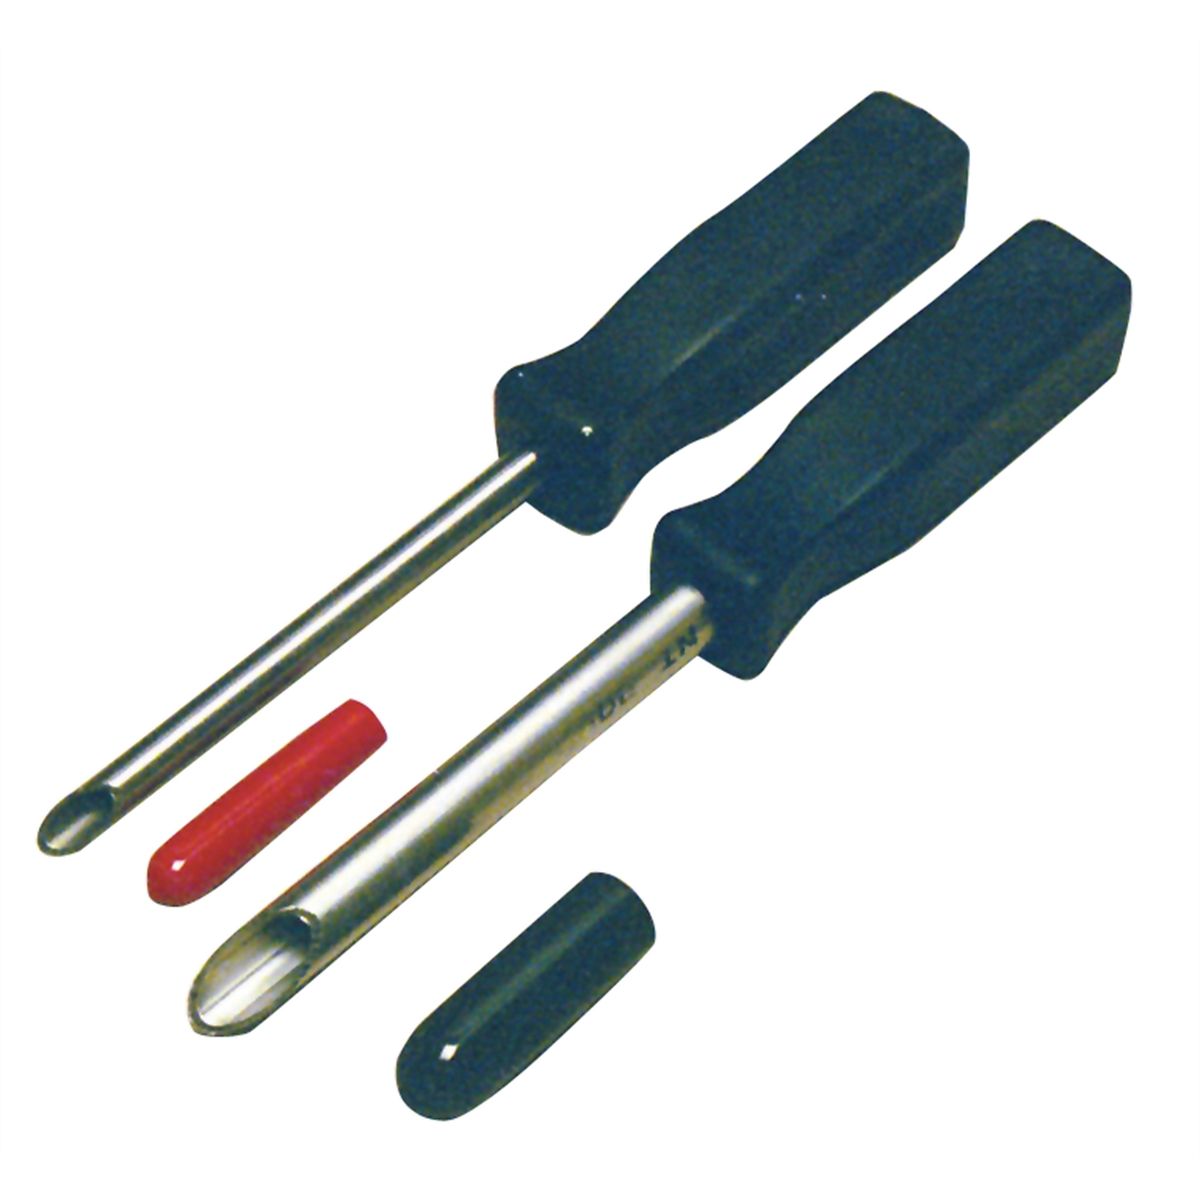 Wire Insertion Tool Kit